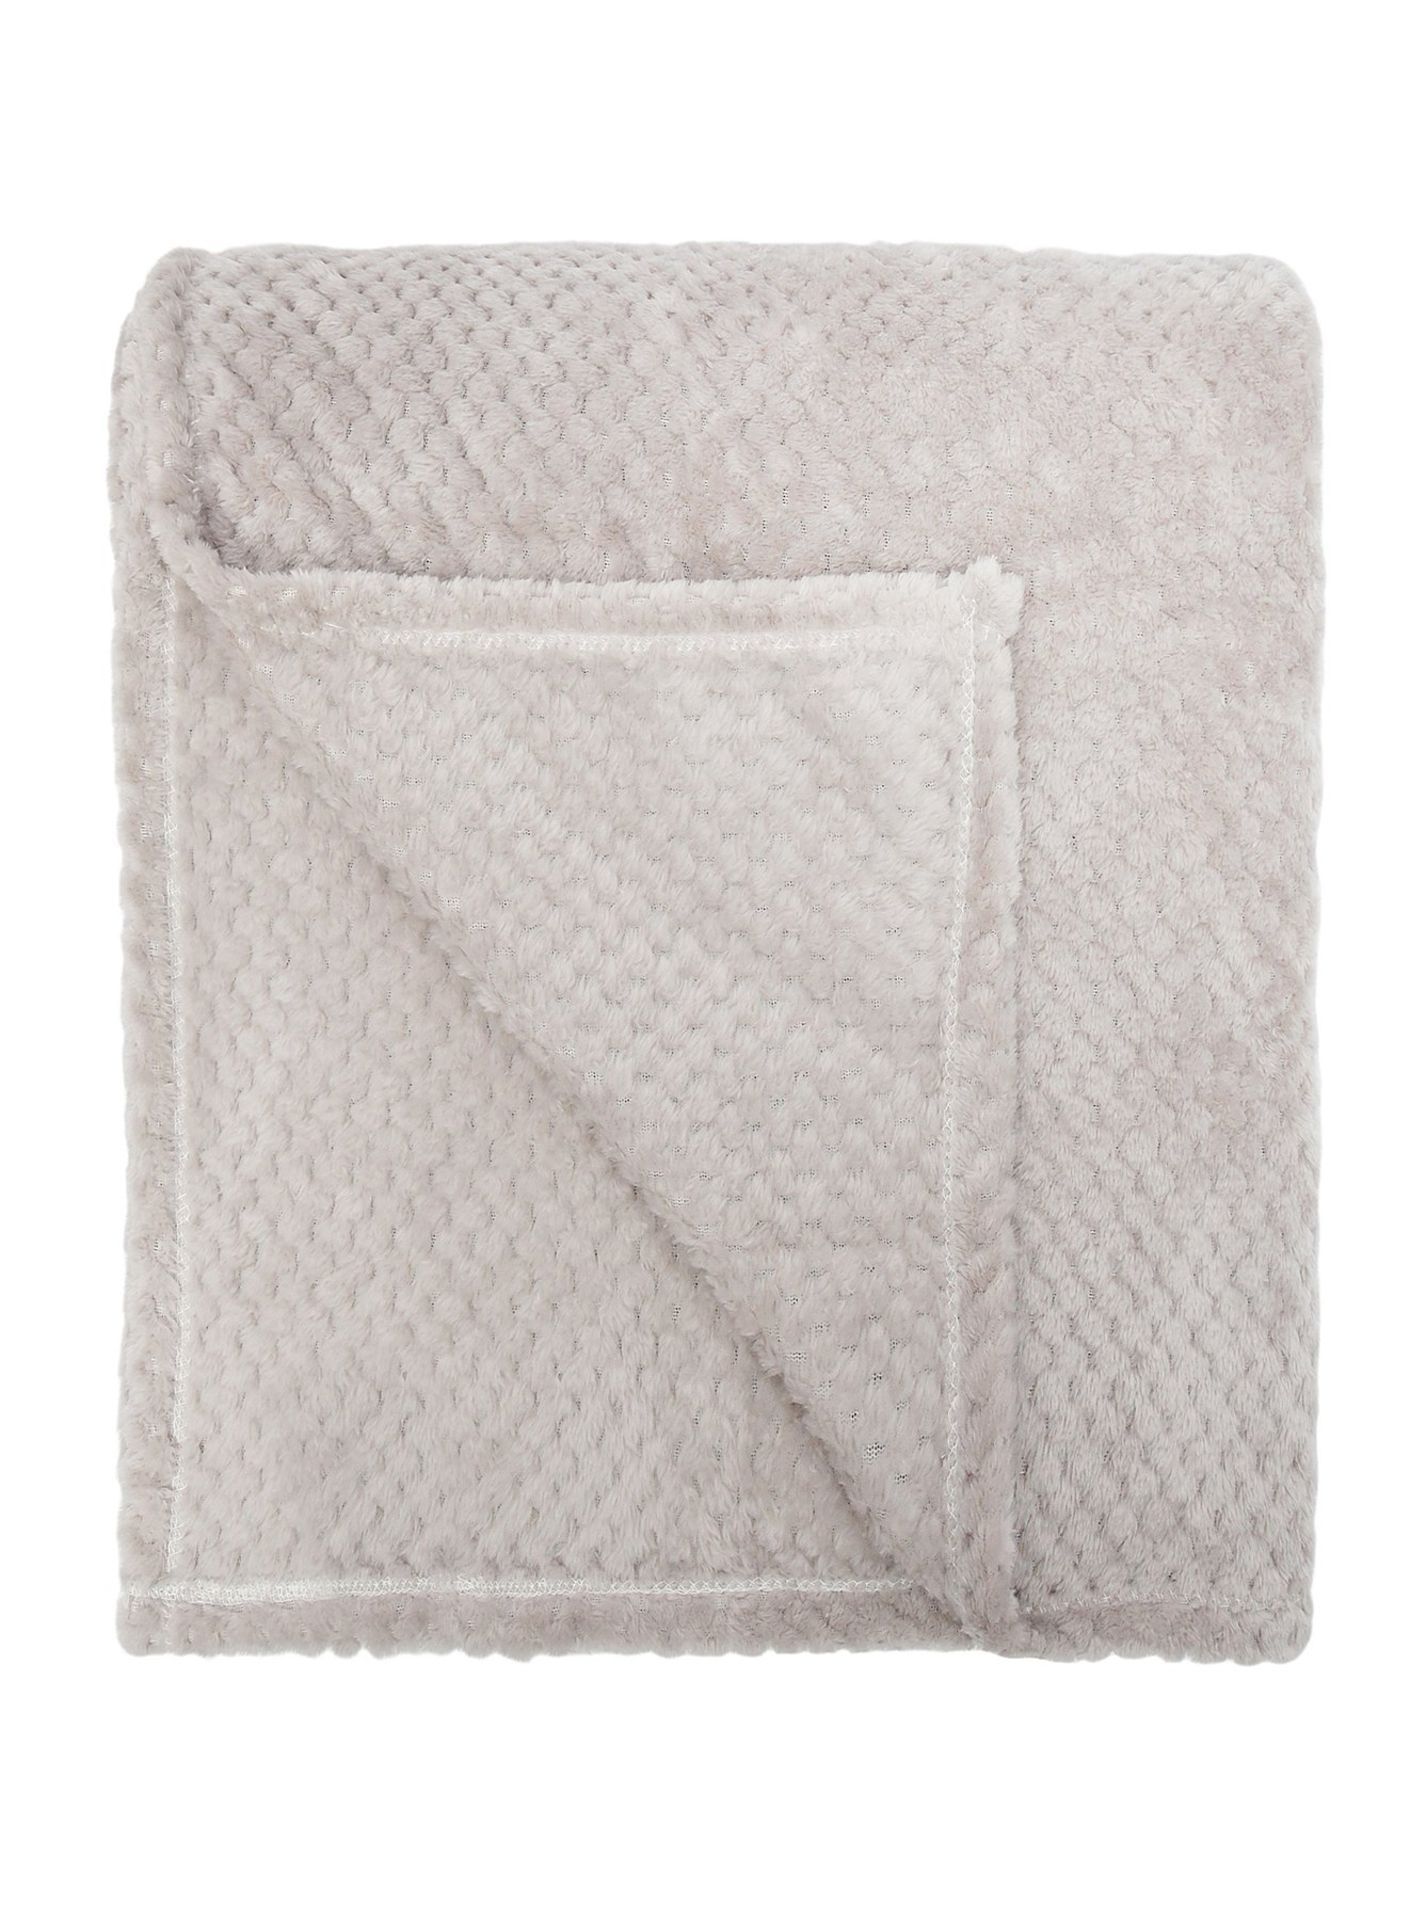 16x NEW & PACKAGED SLEEPDOWN Cosy Collection Soft Touch Waffle Fleece Throw 130 x 160cm - NATURAL. - Image 3 of 3